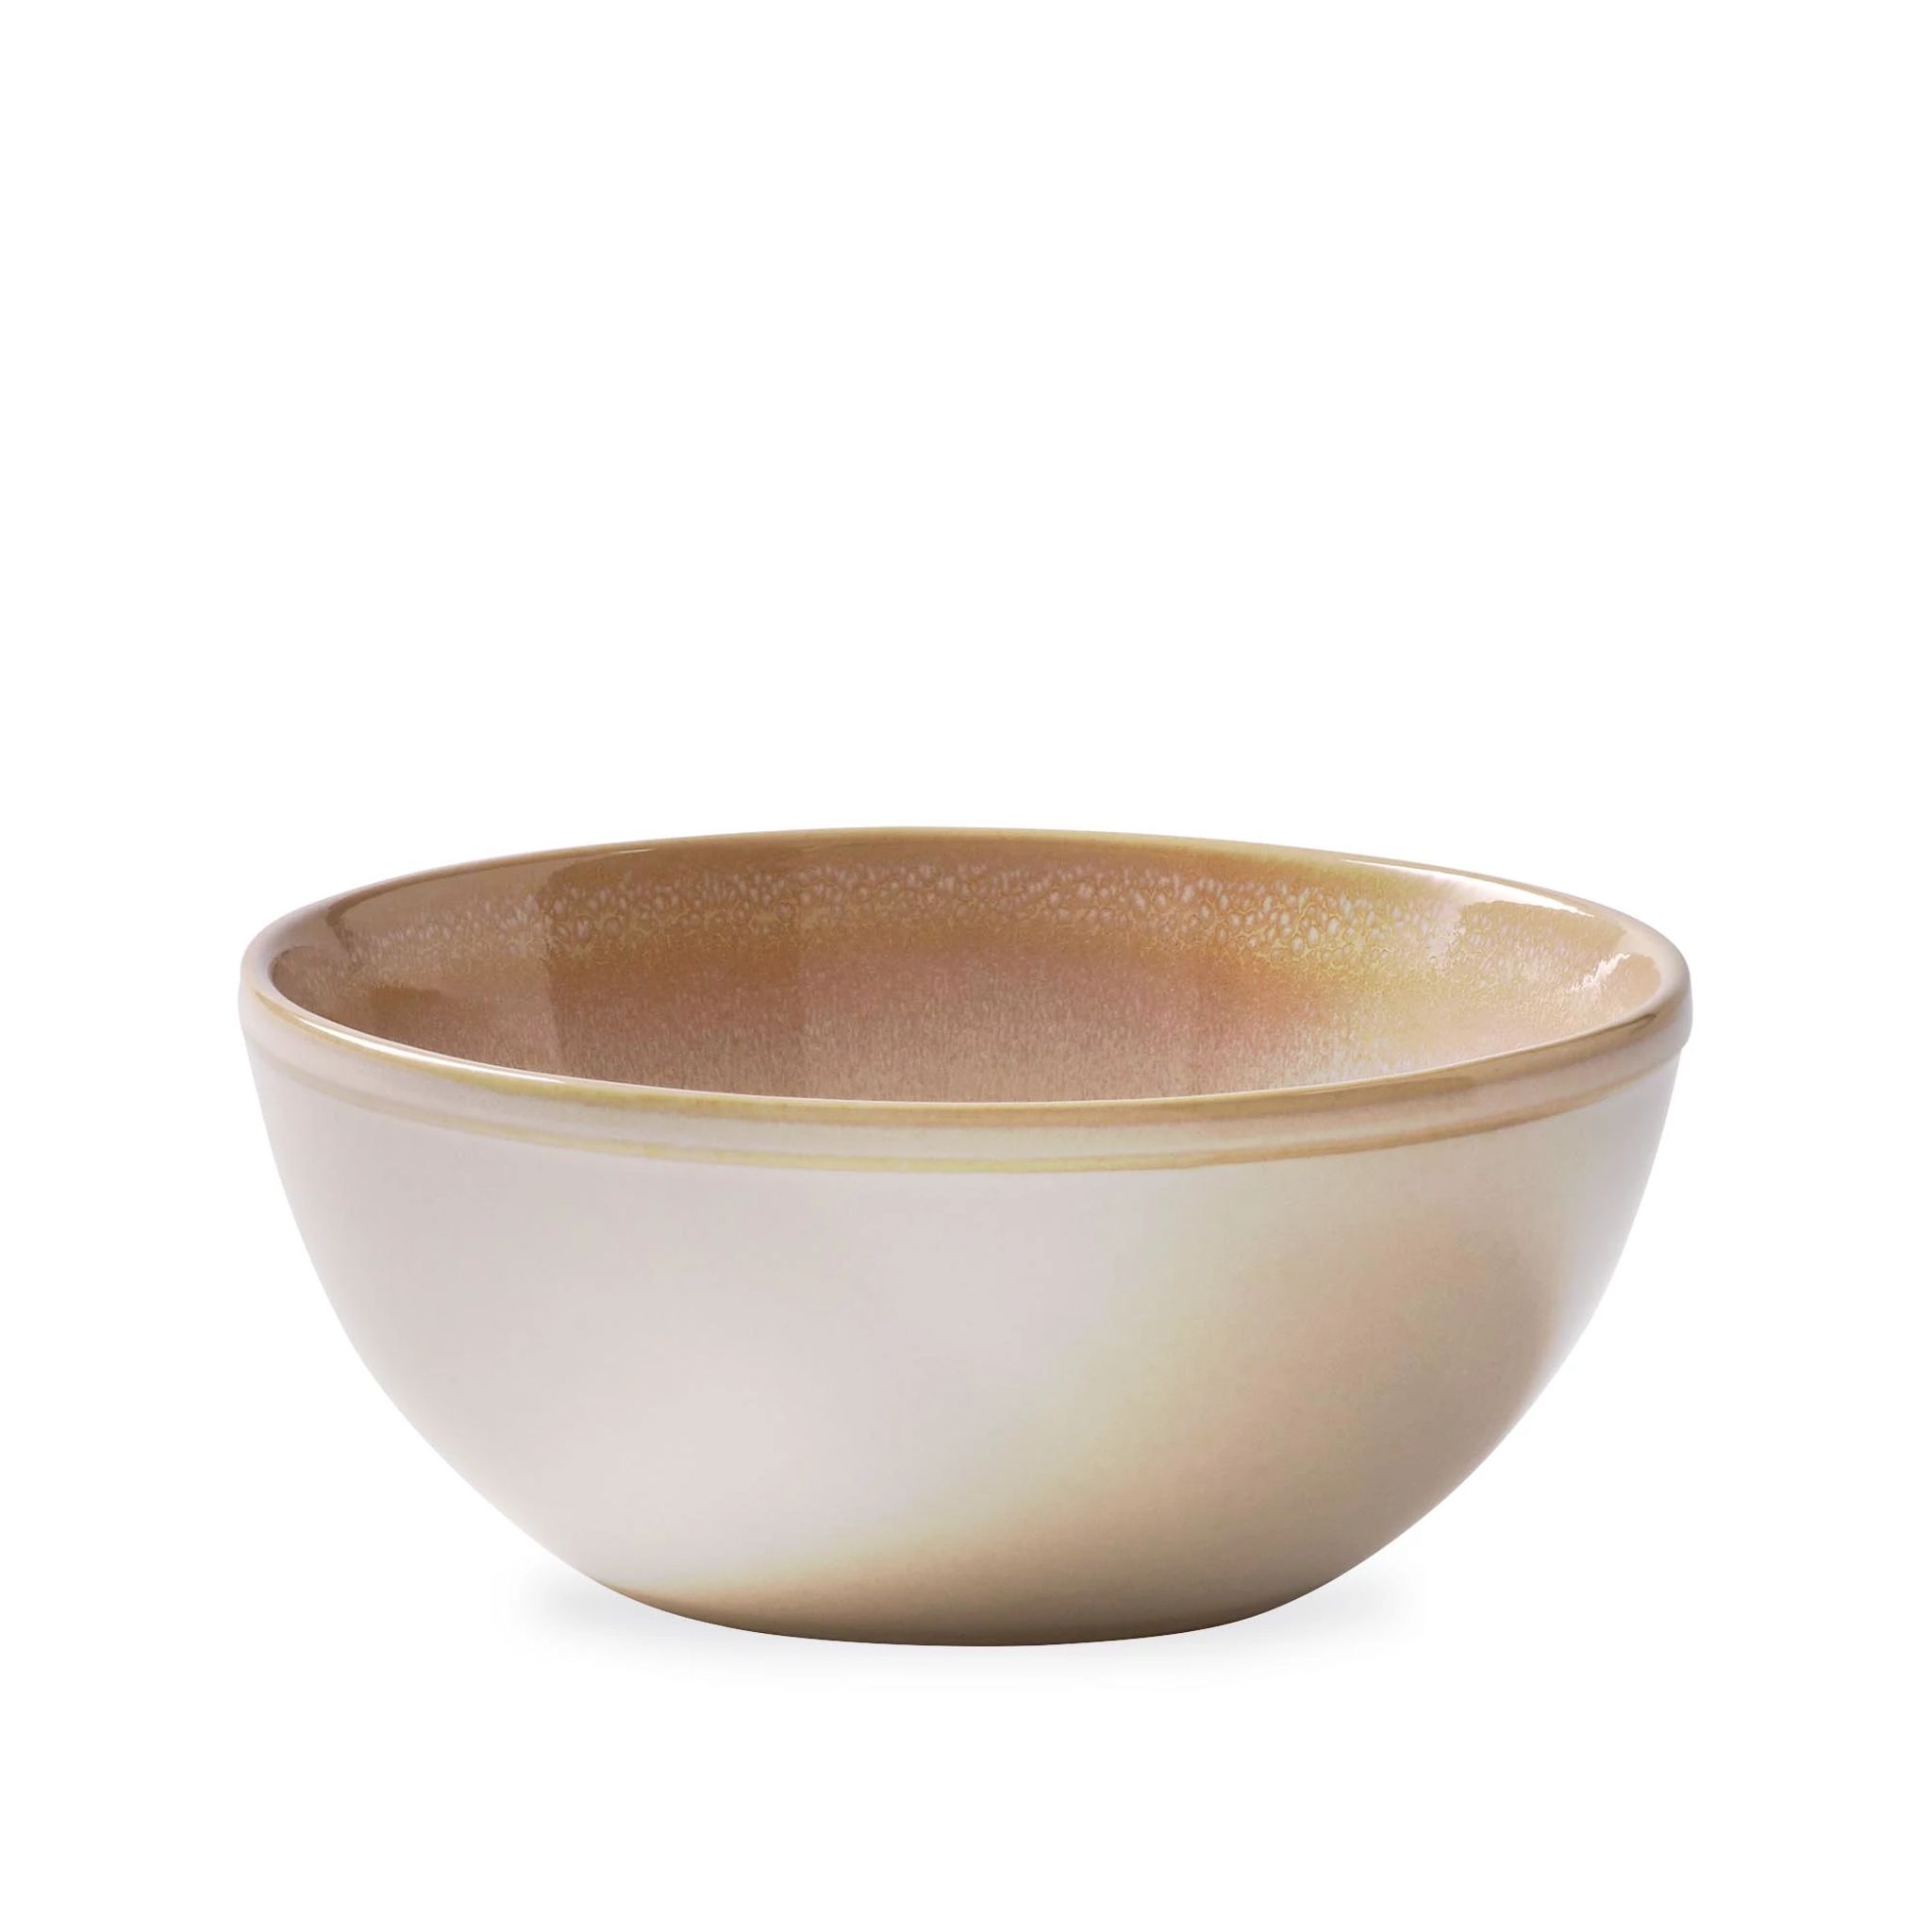 Stoneware Oatmeal 21-ounce Cereal Bowl